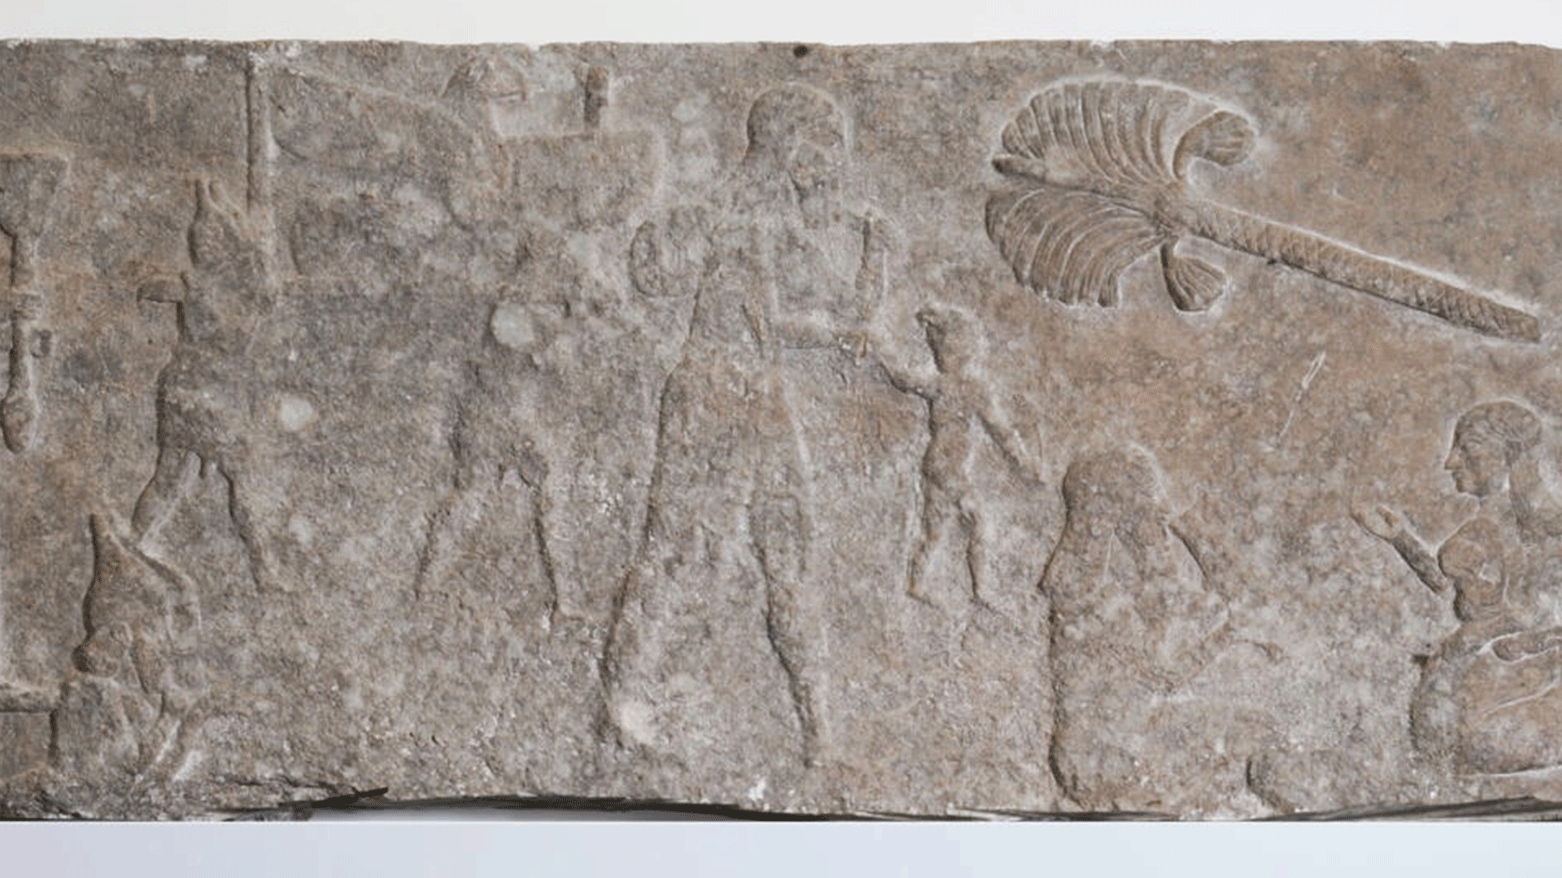 One of the Assyrian reliefs from the eighth century BC that were returned to Iraq by Switzerland on Friday (Photo: AFP)